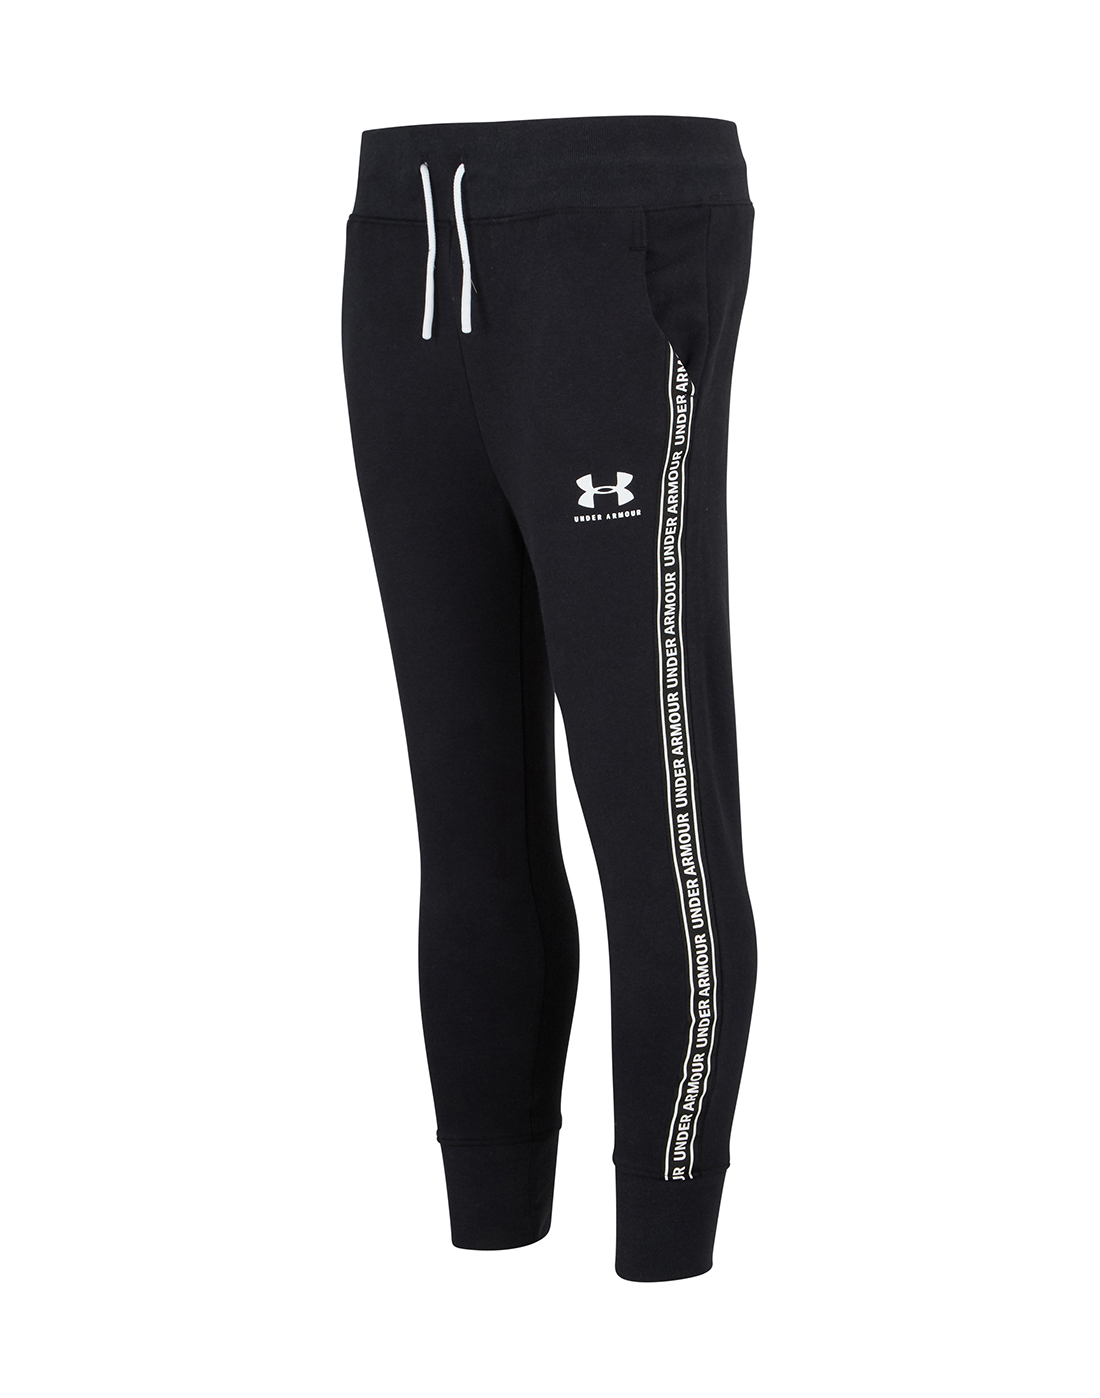 Under Armour Older Girls Taping Pant - Black | Life Style Sports IE